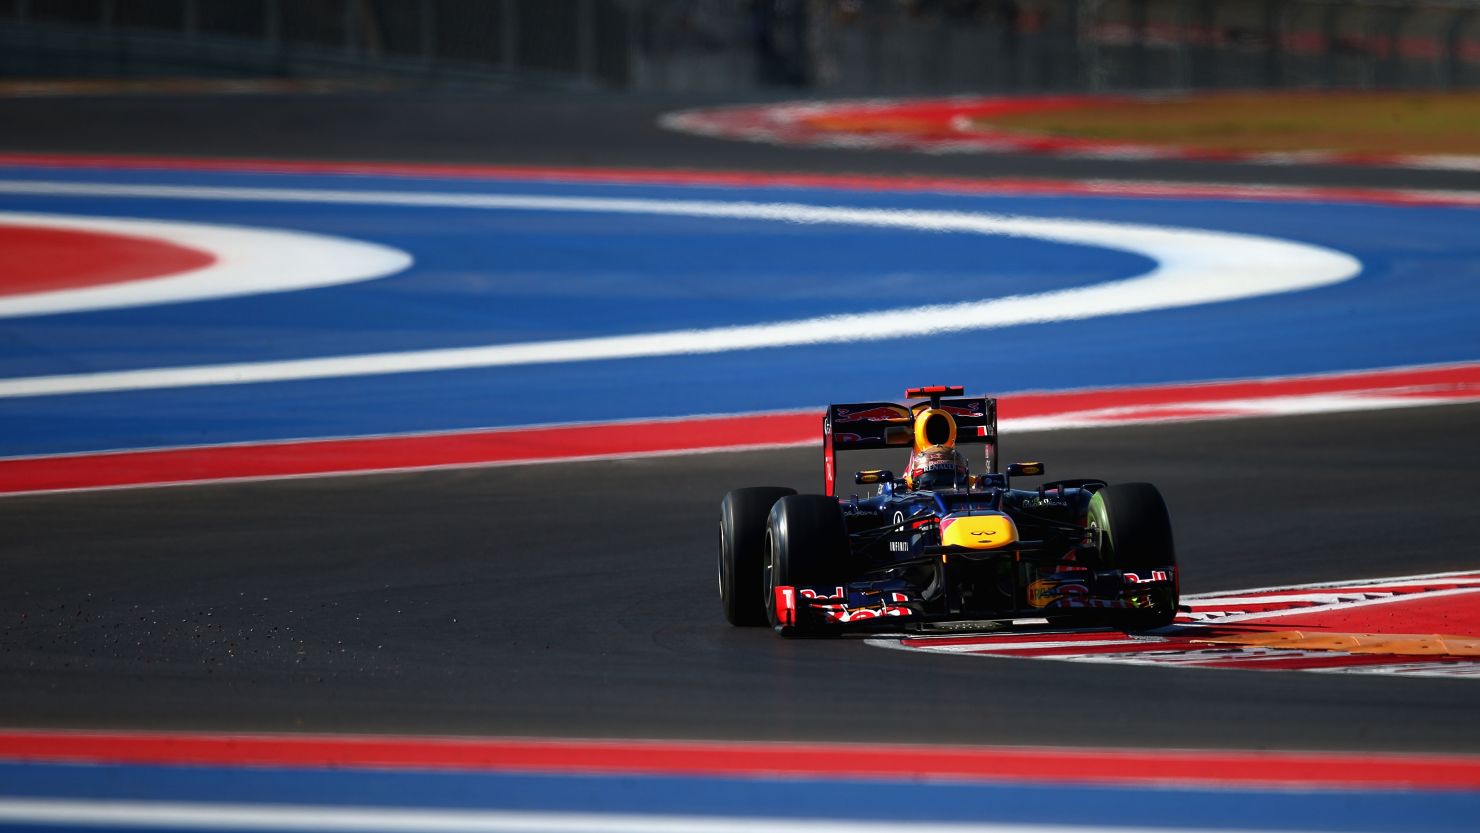 Sebastian Vettel in action during practice for the United States Grand Prix at the Circuit of Americas in Texas.